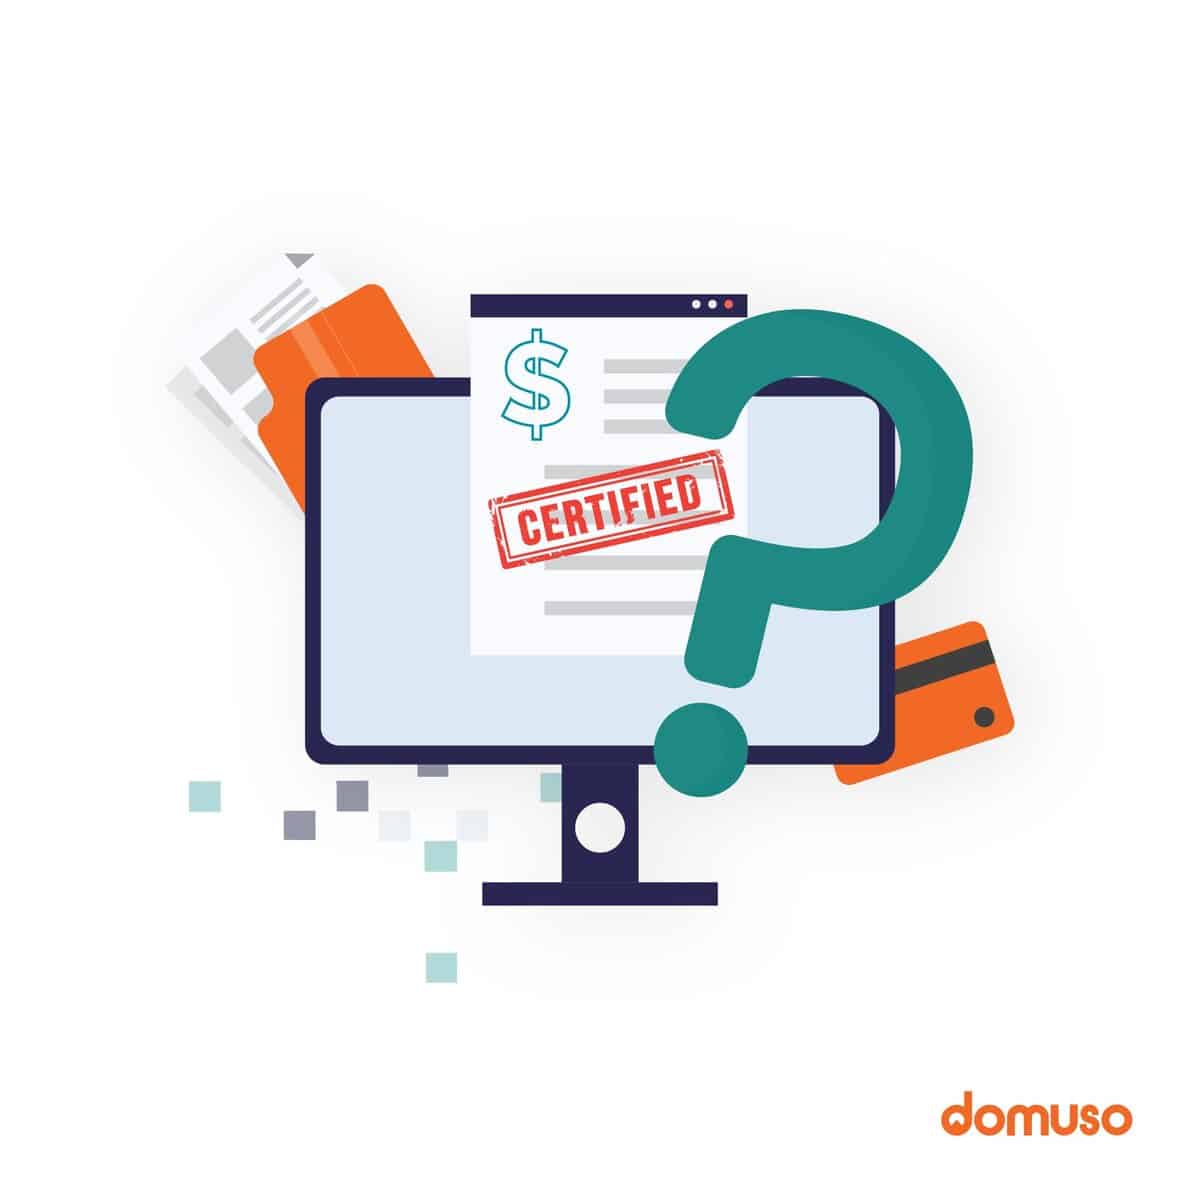 Domuso certified digital funds.